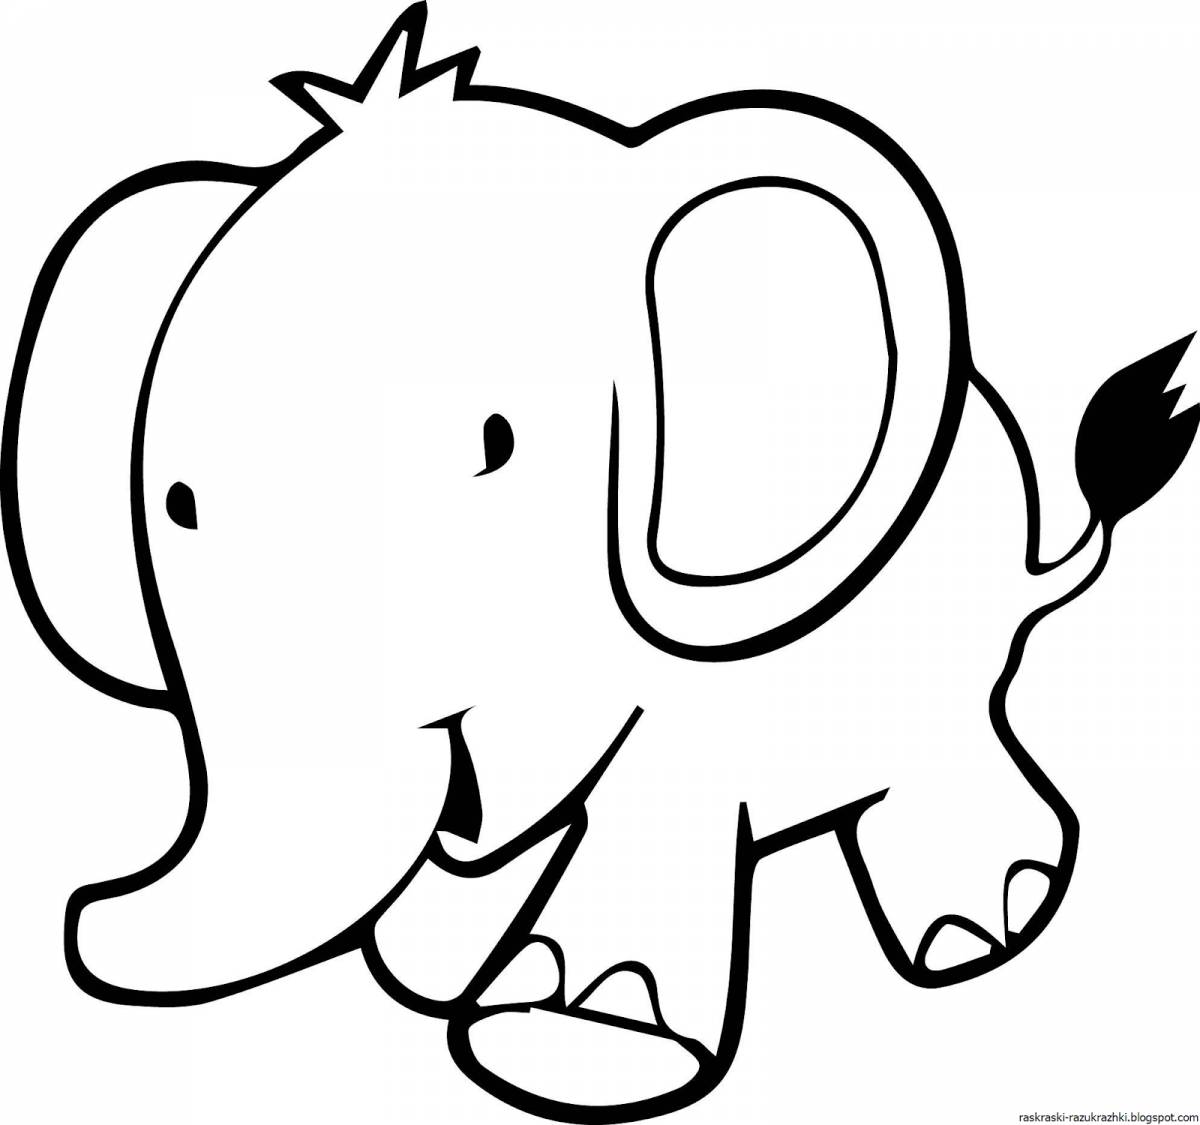 Joyful elephant coloring pages for kids